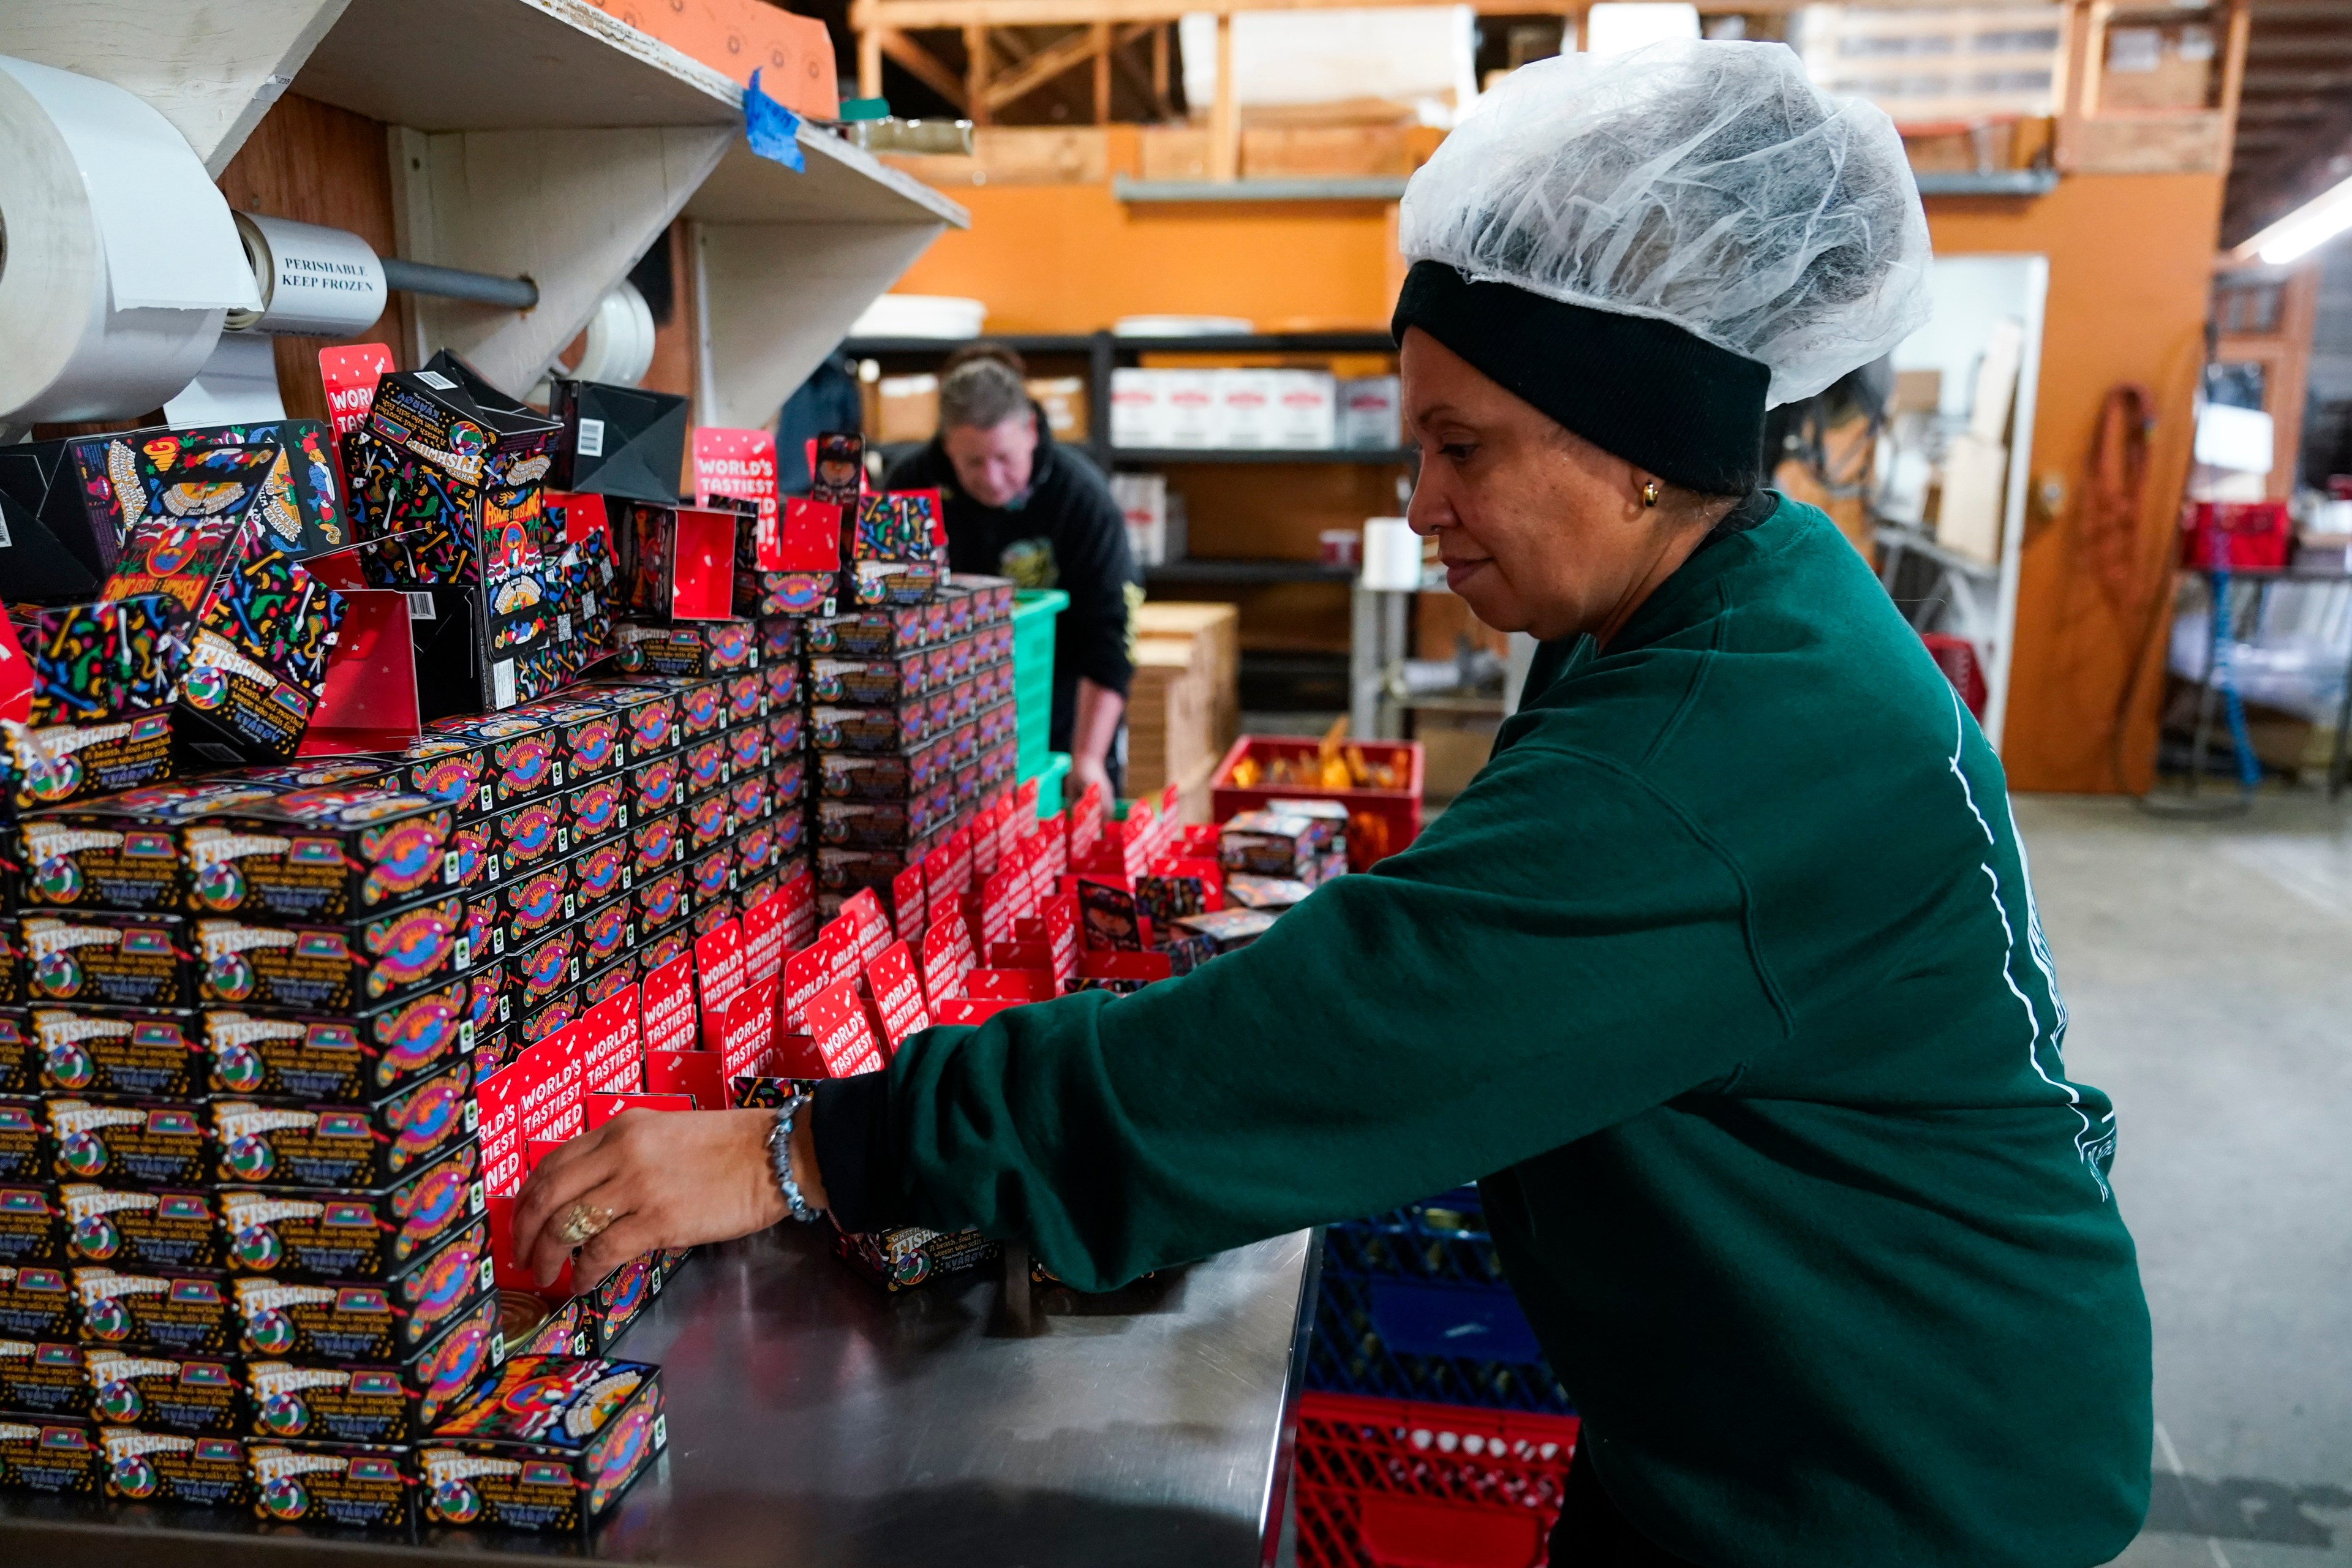 A factory worker with a row of tinned fish items being packaged.